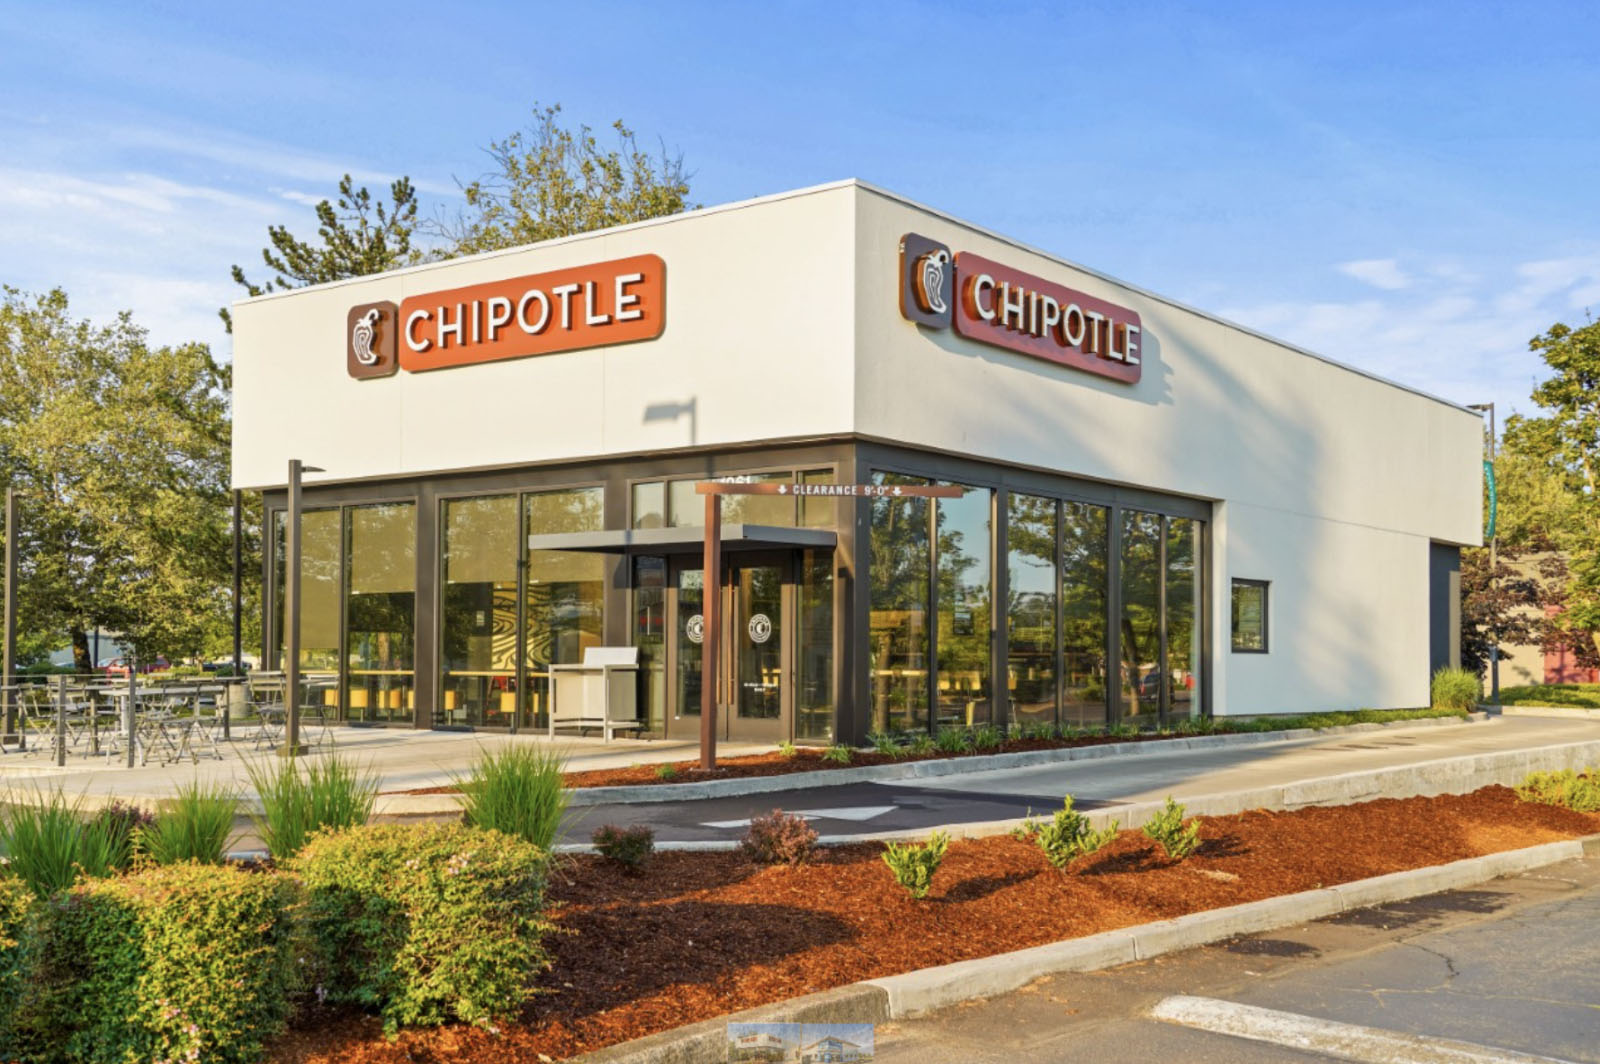 Chipotle building design by Baldwin General Contracting